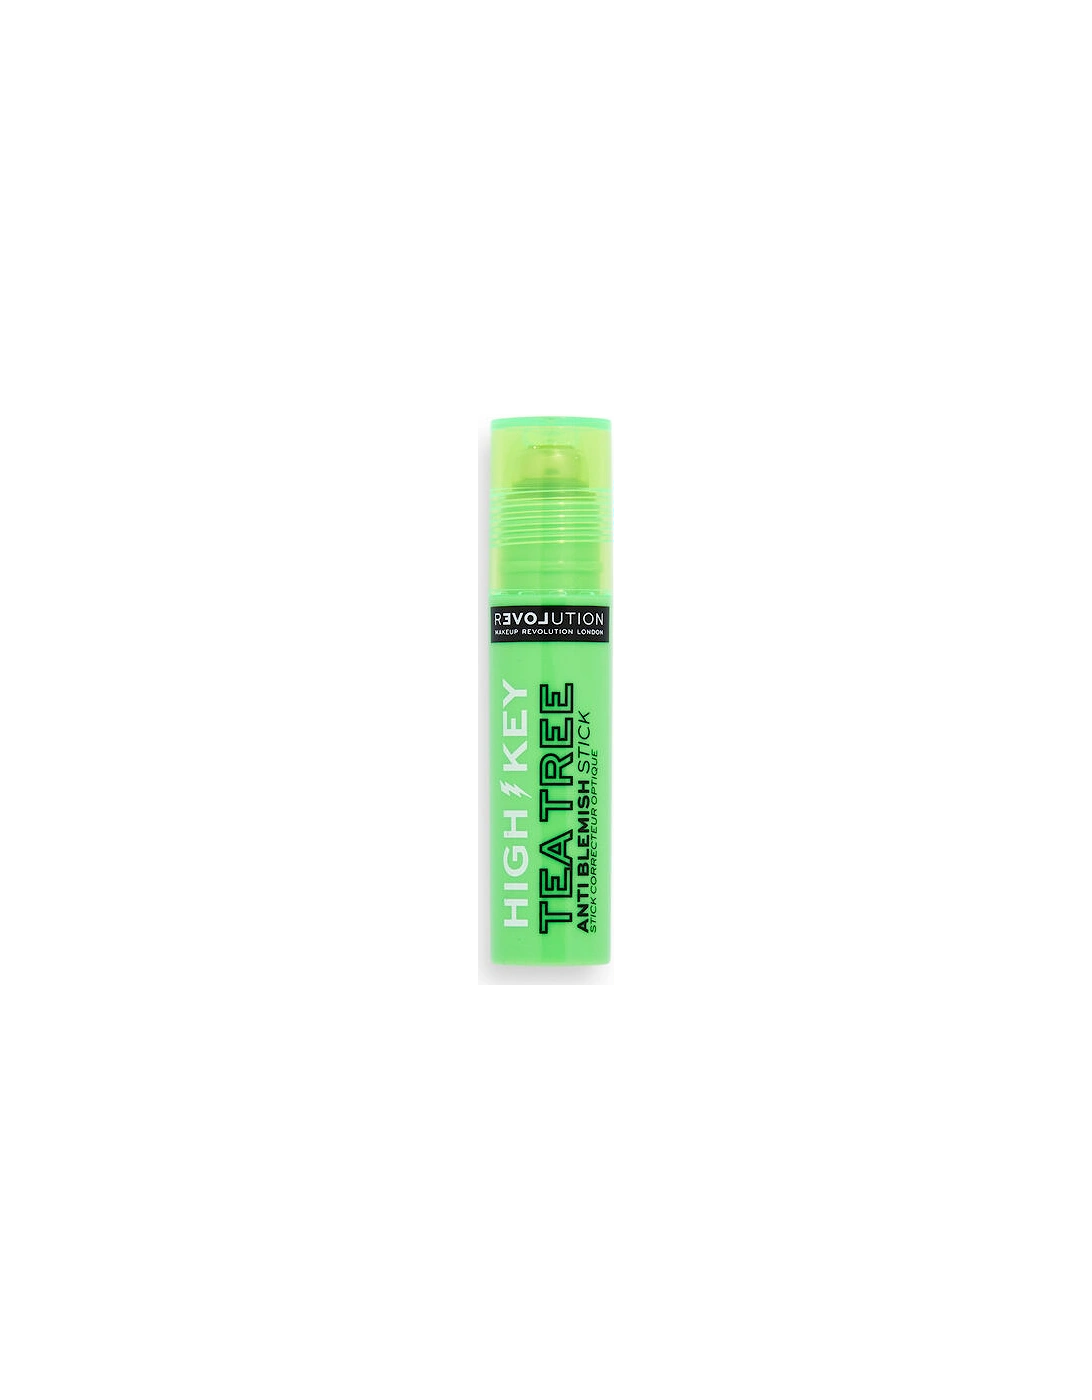 Relove by High Key Anti Blemish Stick, 2 of 1